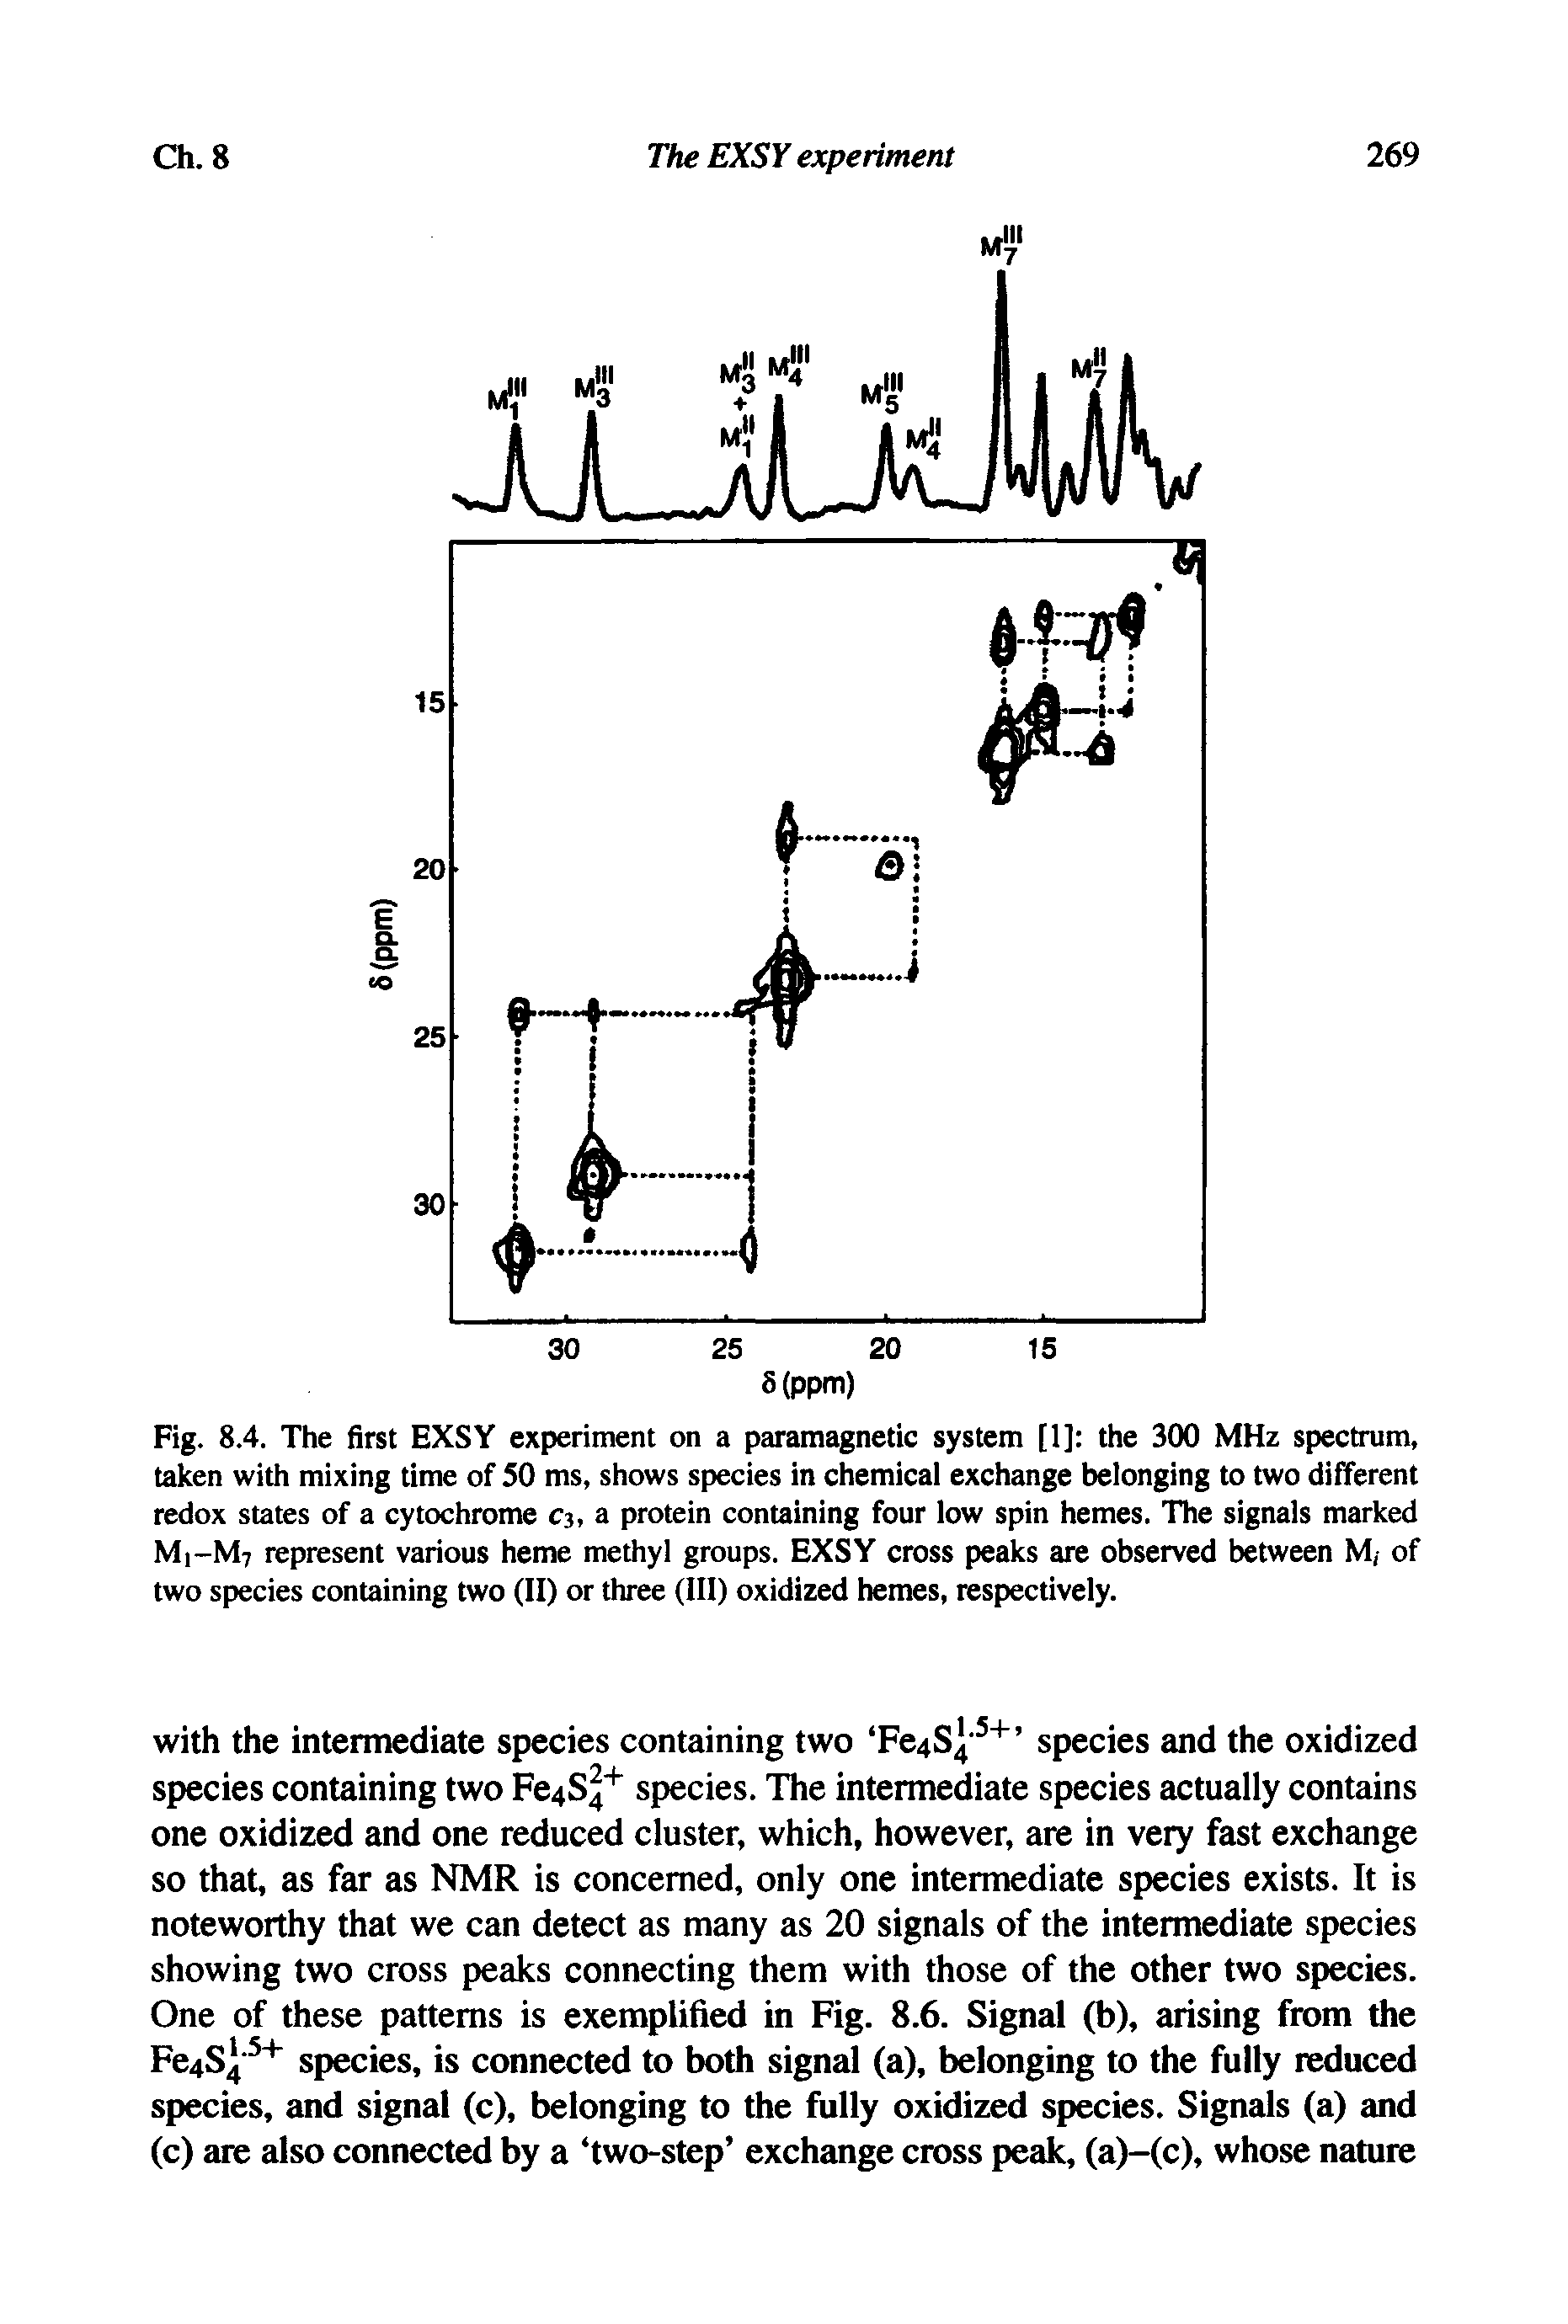 Fig. 8.4. The first EXSY experiment on a paramagnetic system [1] the 300 MHz spectrum, taken with mixing time of 50 ms, shows species in chemical exchange belonging to two different redox states of a cytochrome d, a protein containing four low spin hemes. The signals marked M1-M7 represent various heme methyl groups. EXSY cross peaks are observed between M, of two species containing two (II) or three (III) oxidized hemes, respectively.